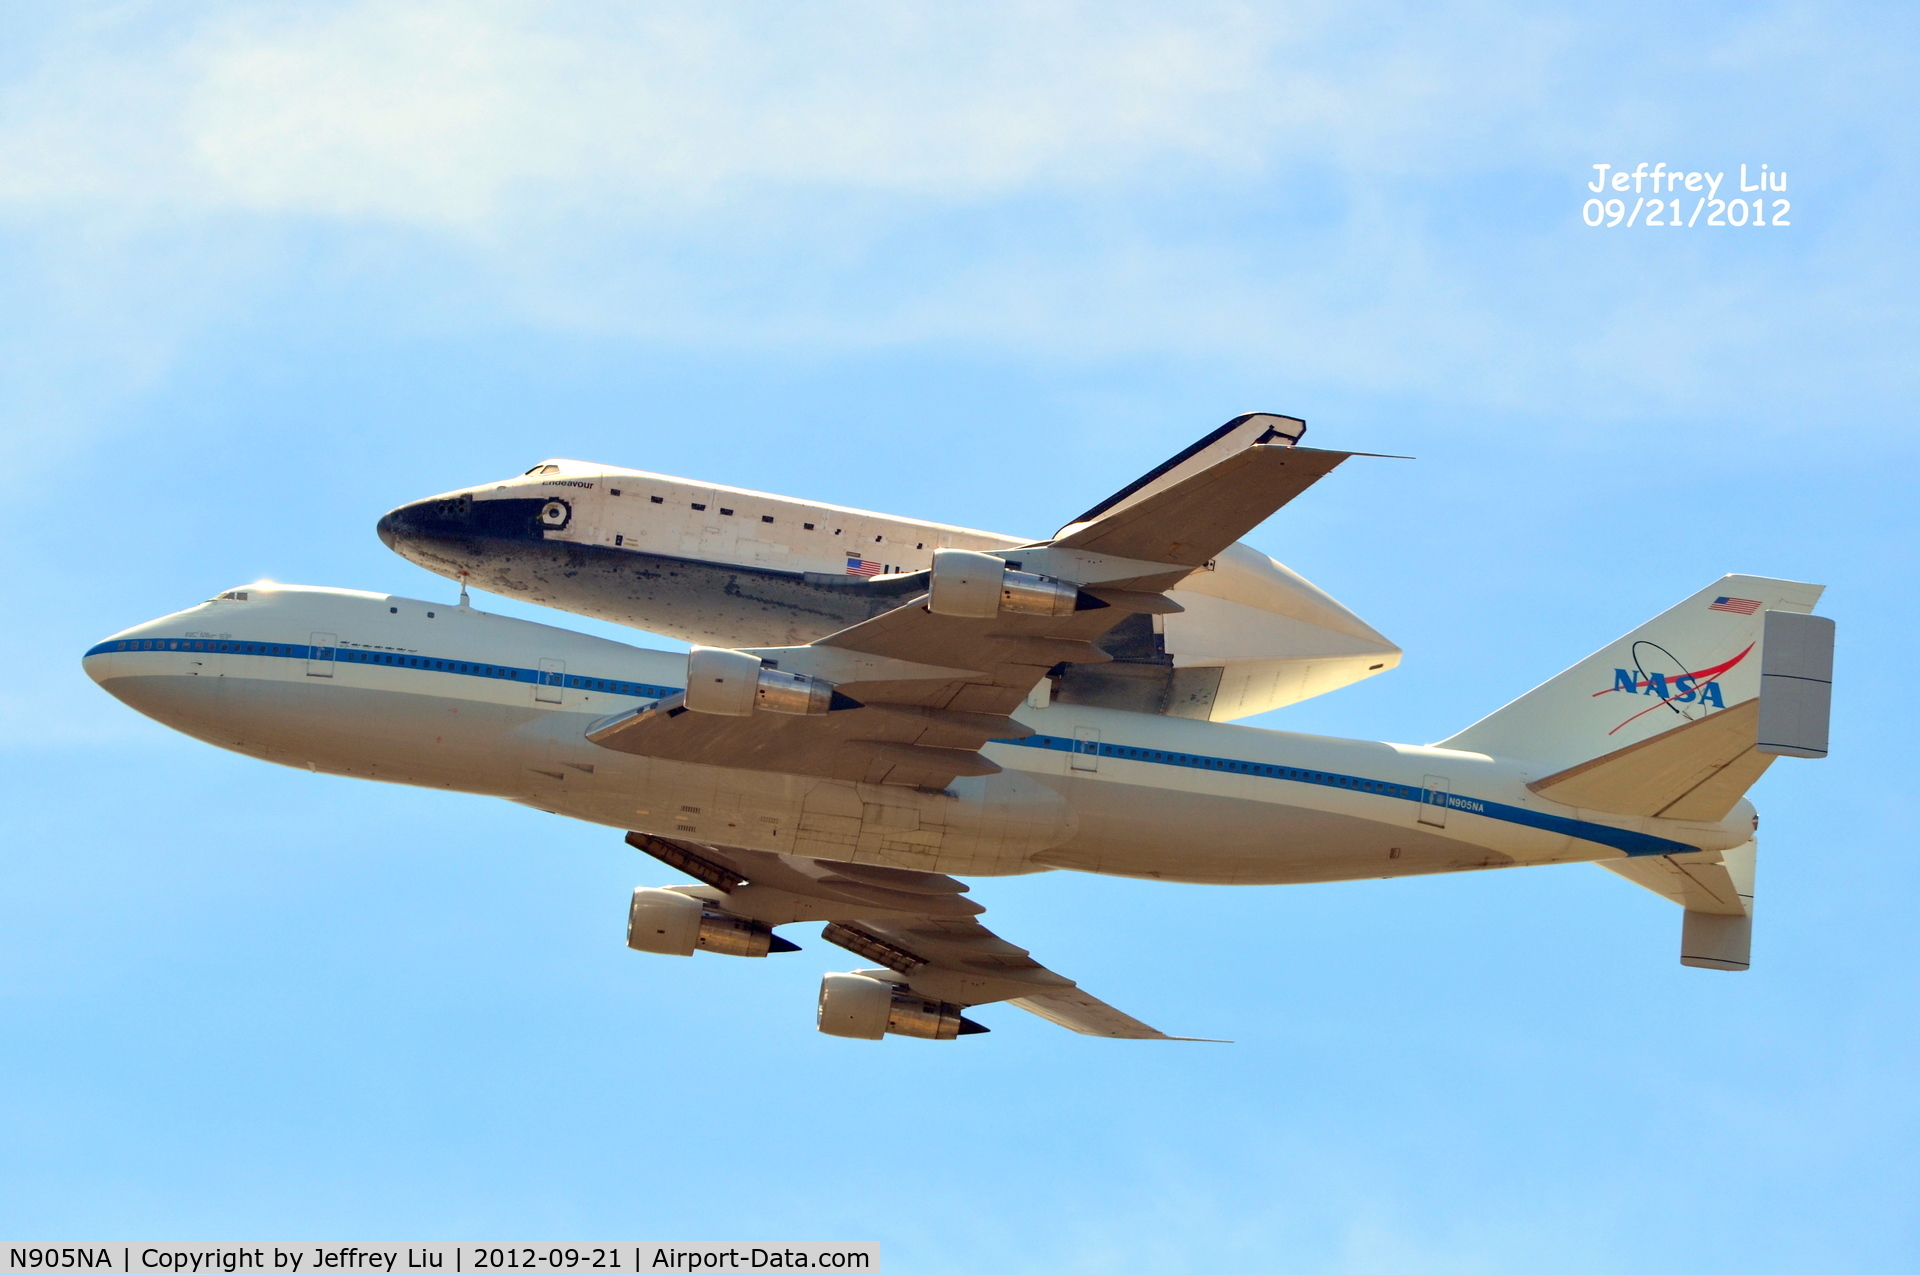 N905NA, 1970 Boeing 747-123 C/N 20107, Fly over Griffith Observatory